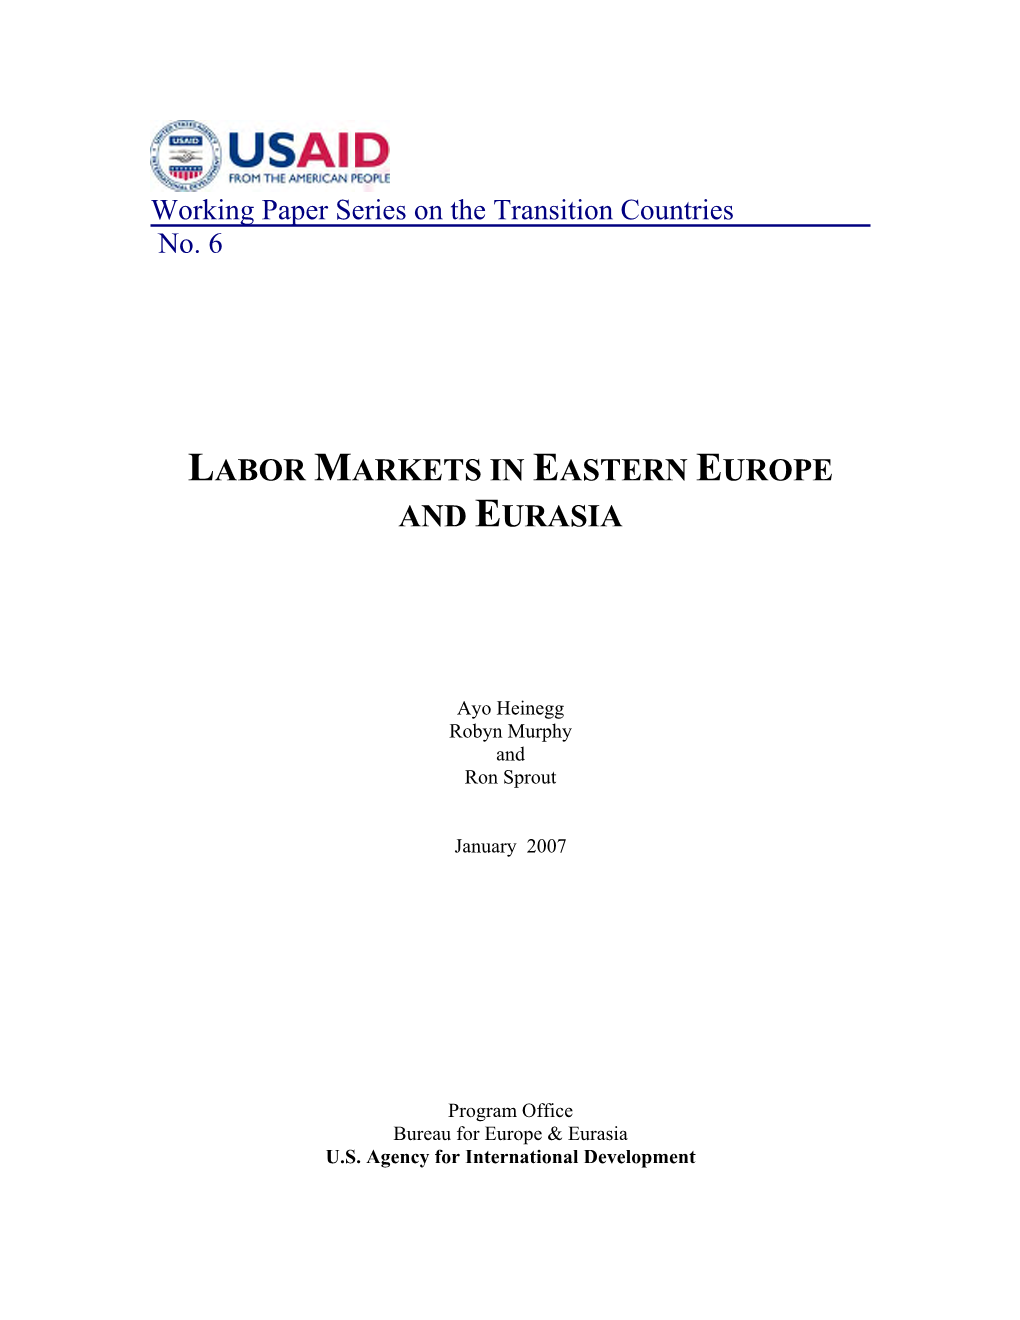 Labor Markets in Eastern Europe and Eurasia